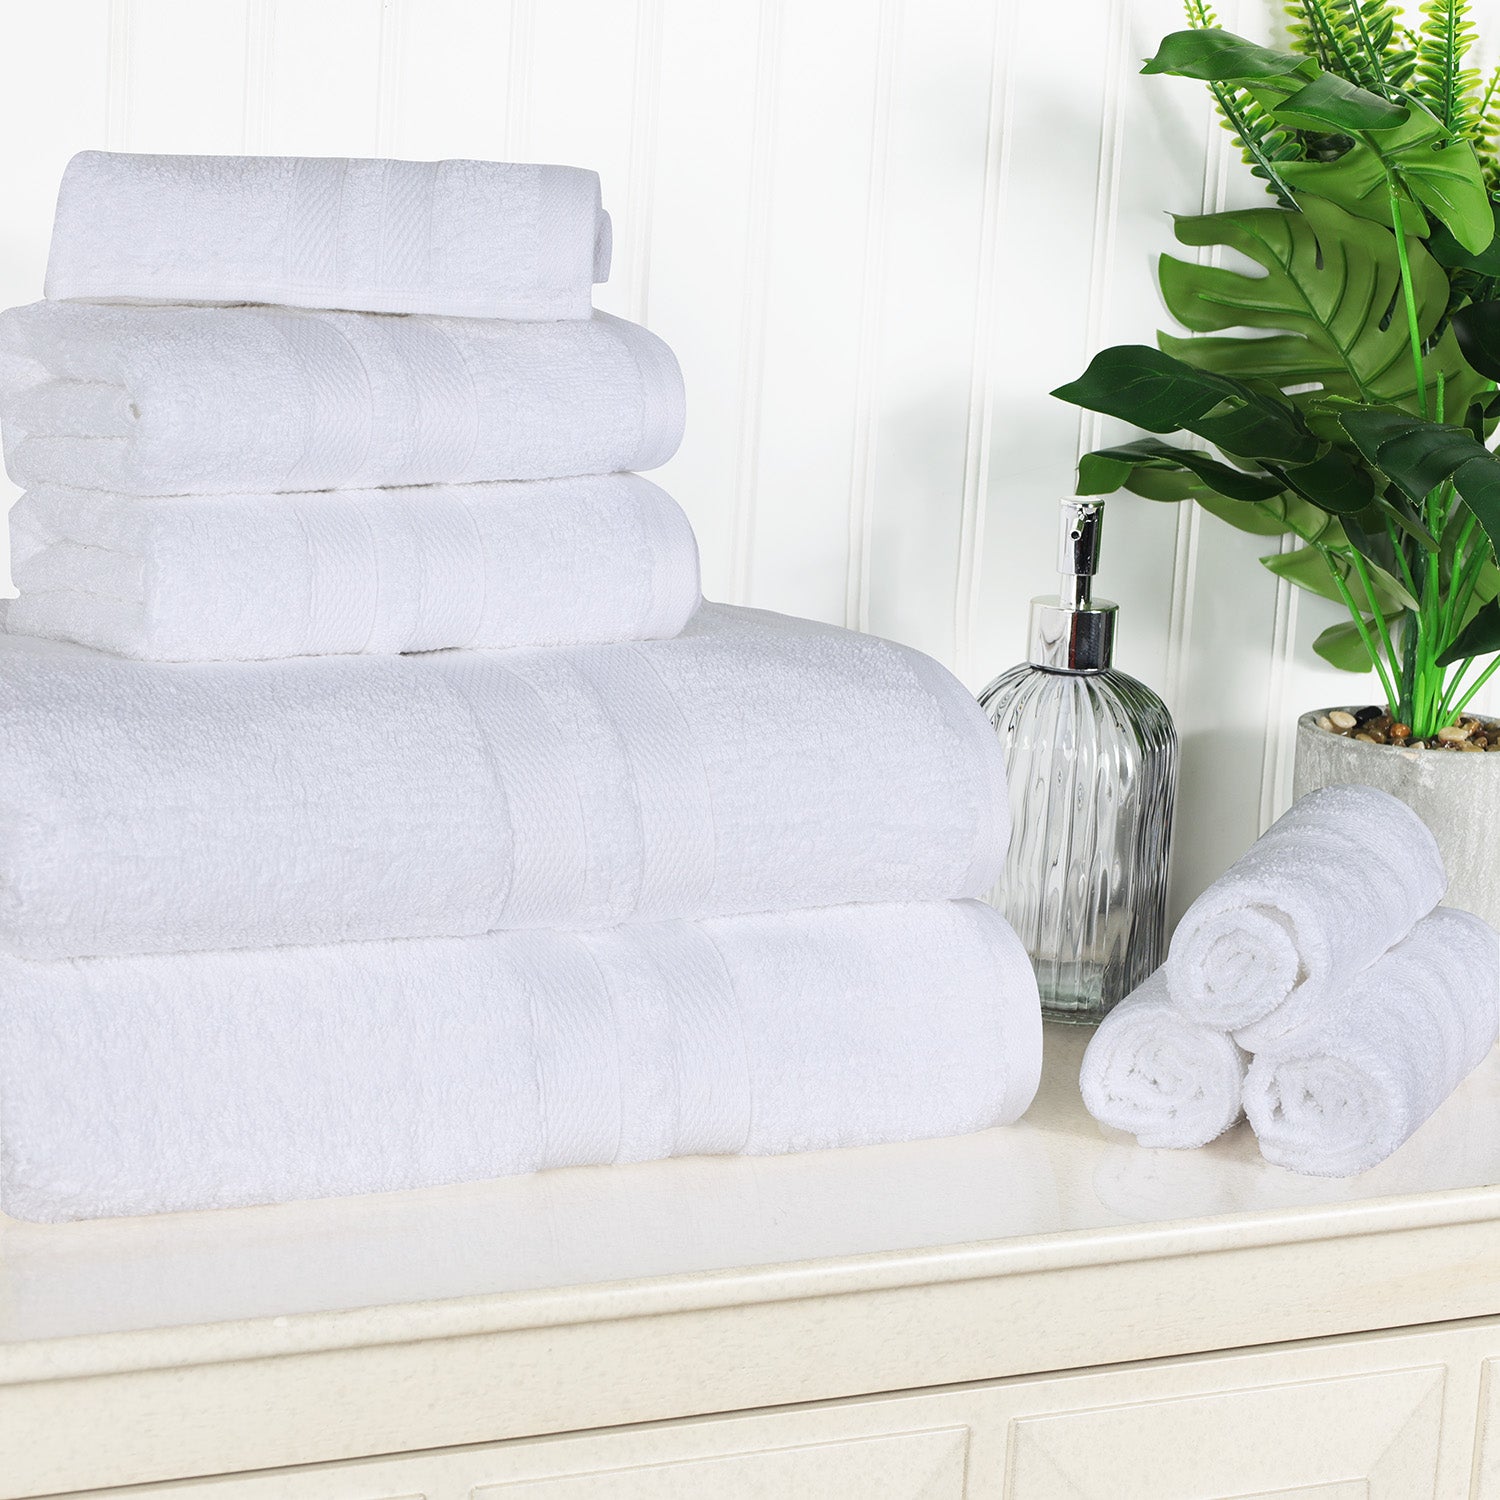 Superior Ultra Soft Cotton Absorbent Solid Assorted 8-Piece Towel Set - White